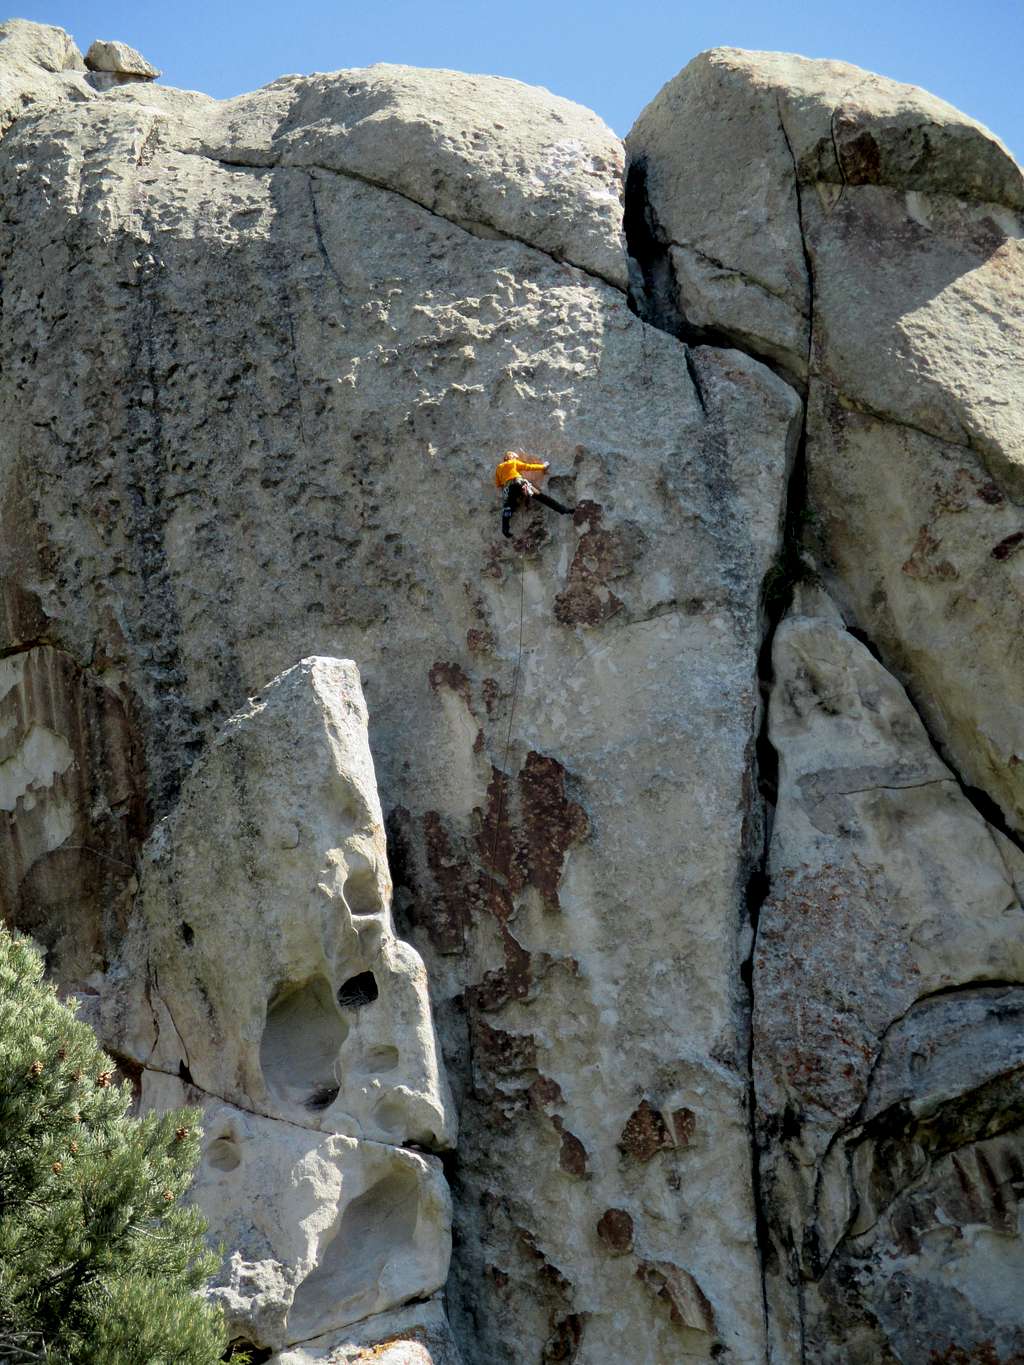 Sizzler, 5.12a